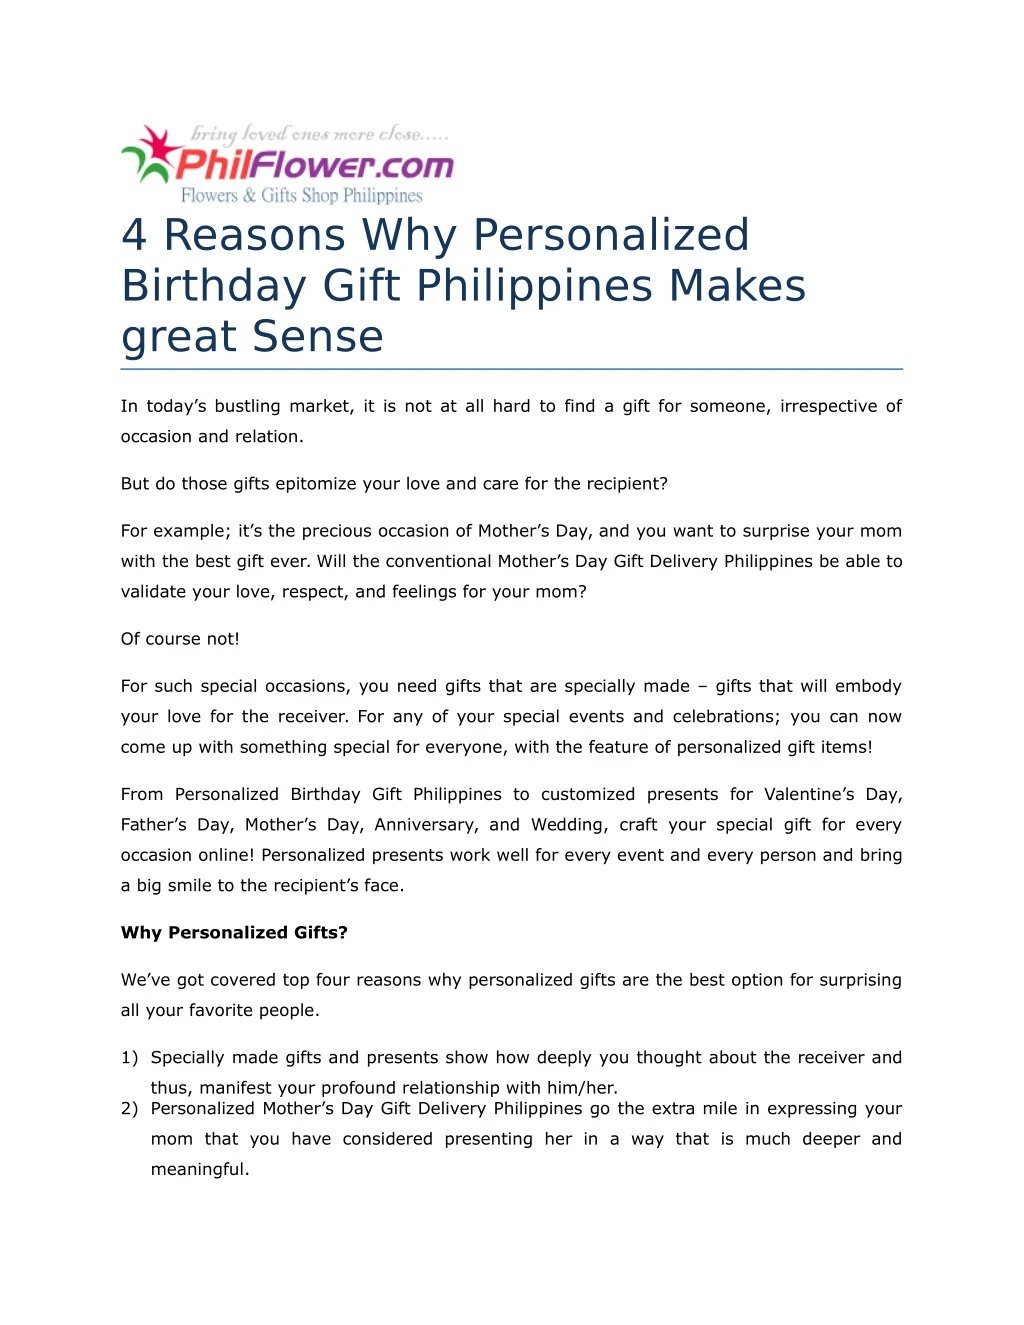 4 reasons why personalized birthday gift